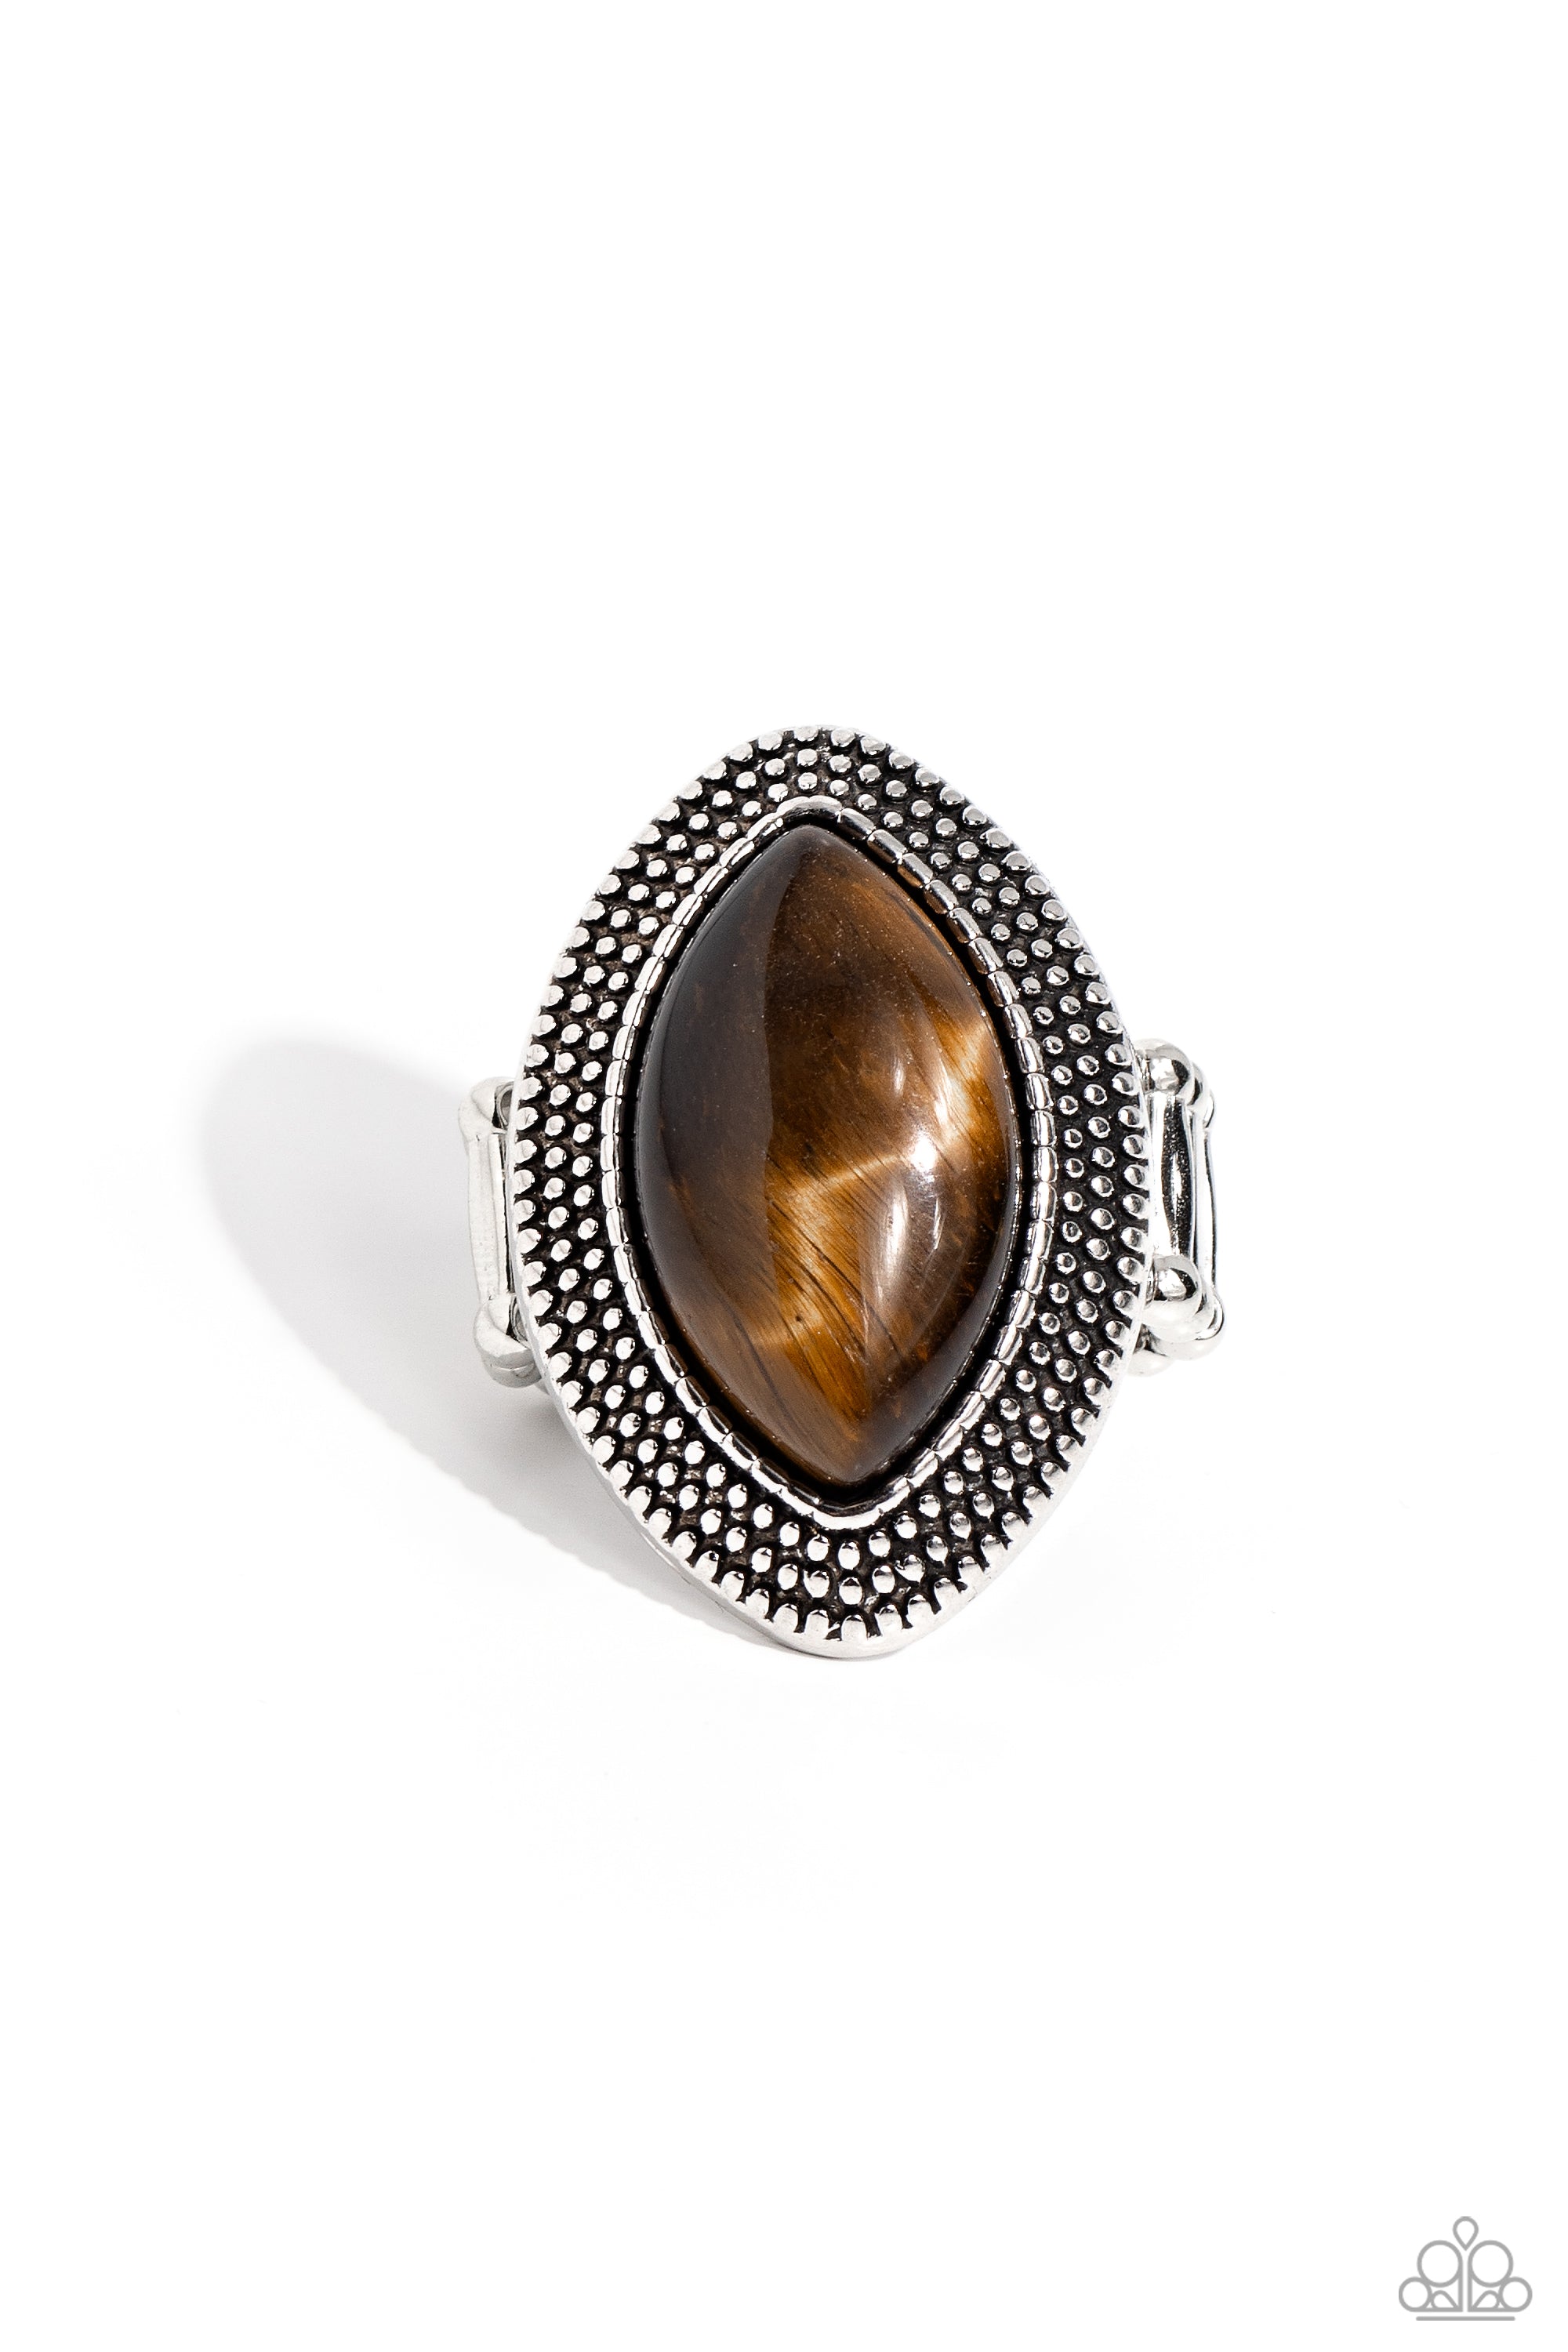 Artisanal Apothecary Brown Tiger's Eye Stone Ring - Paparazzi Accessories- lightbox - CarasShop.com - $5 Jewelry by Cara Jewels